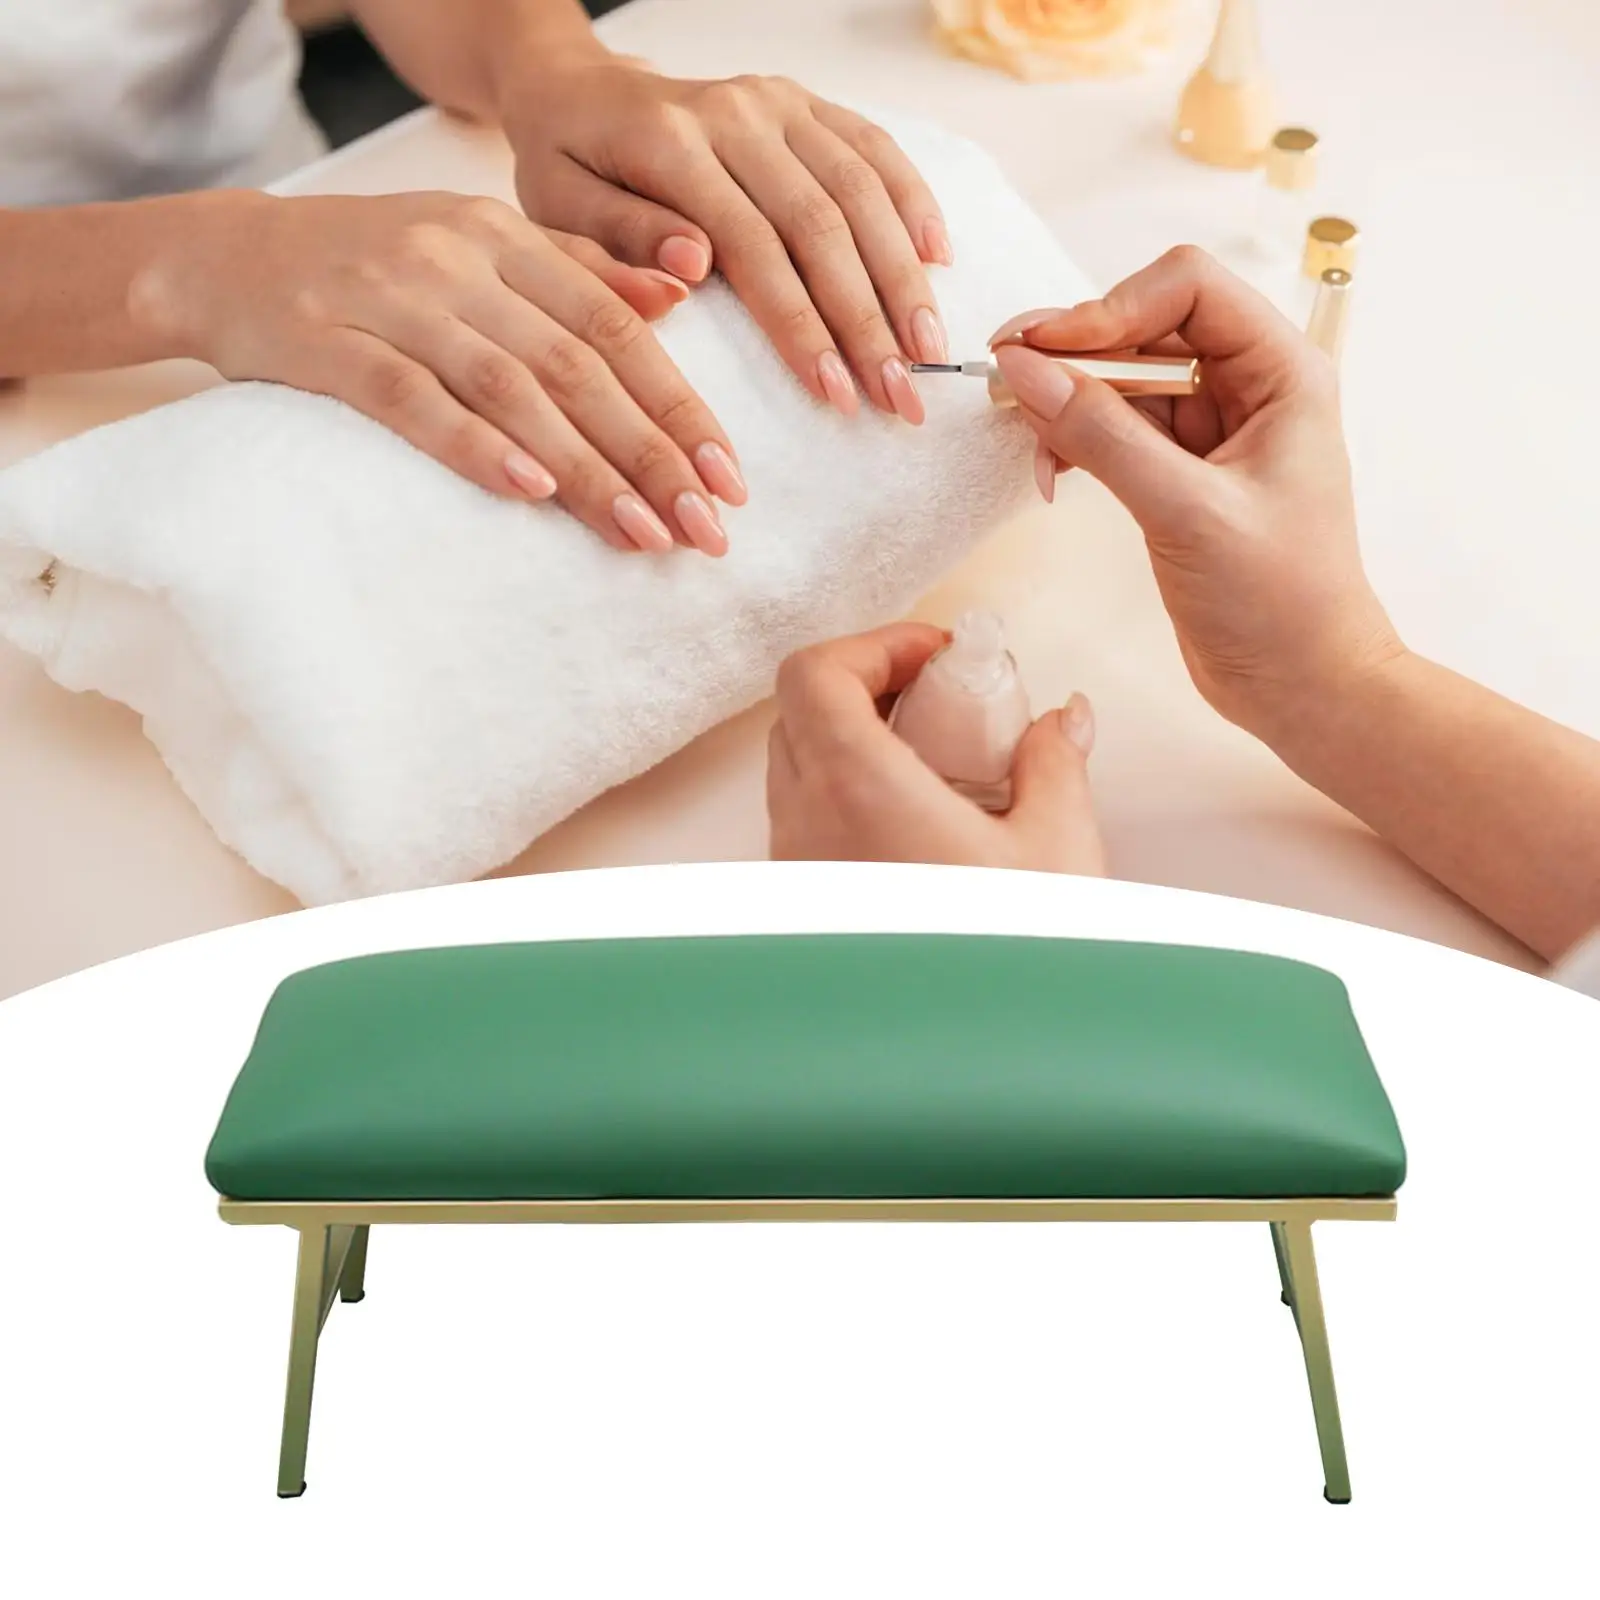 Nail Arm Rest Mat Professional Table Non Slip Accessories Nail Arm Rest Cushion for Salon Manicurist Home Hand Nail